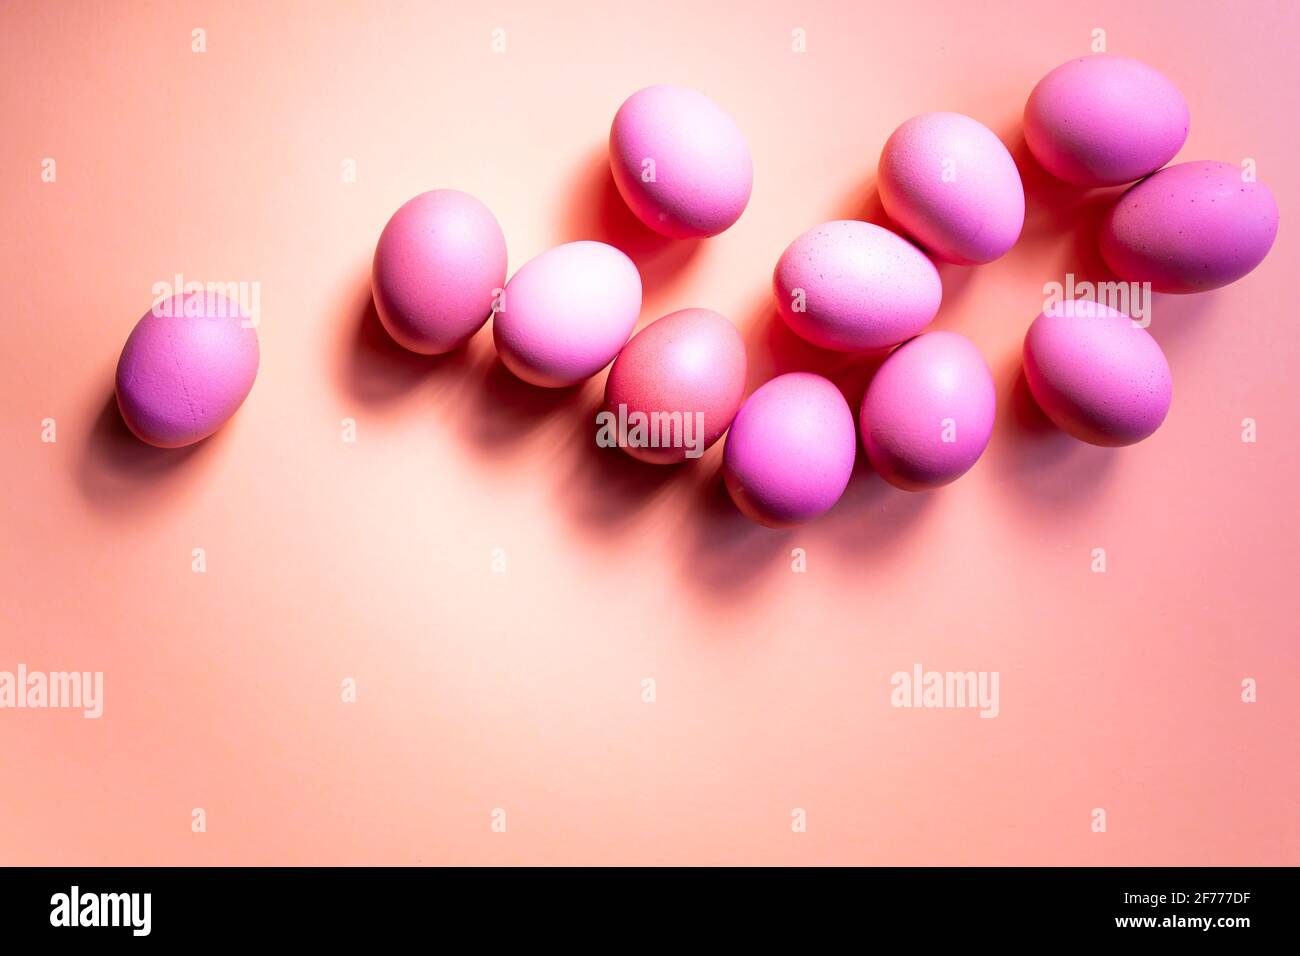 Group of pink eggs isolated on red background. Easter concept. Stock Photo